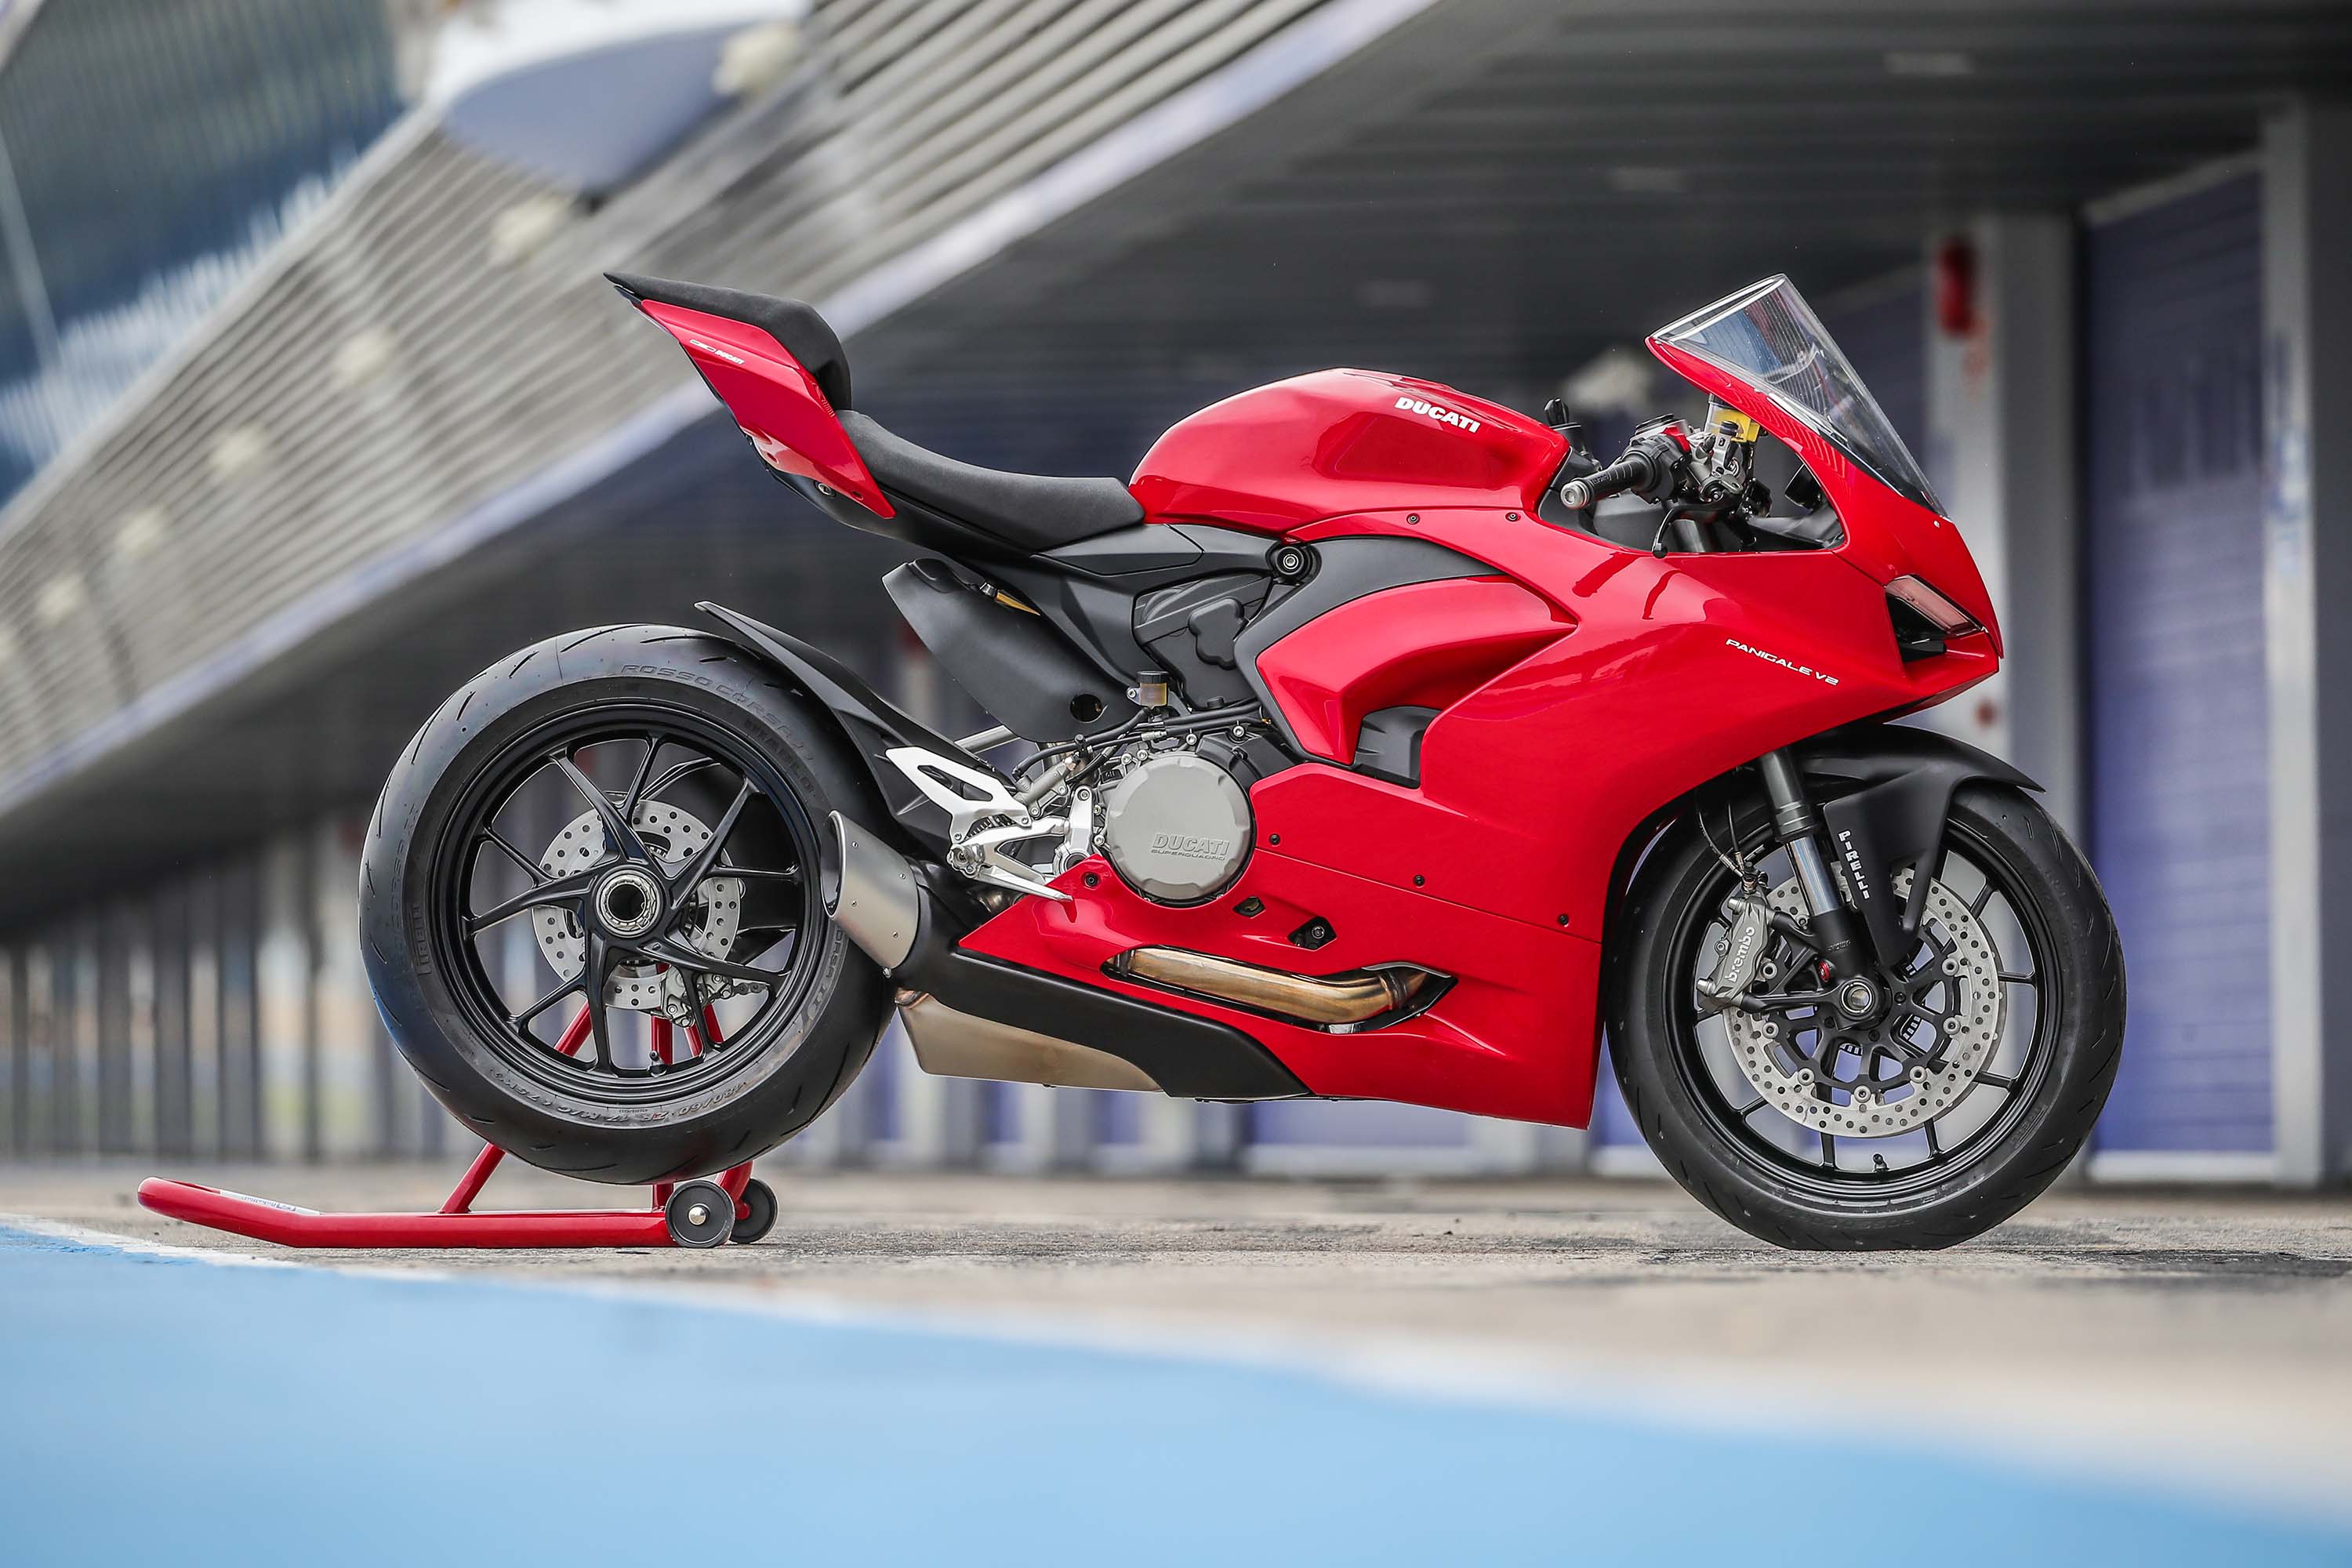 What Its Like To Ride The Ducati Panigale V2 A Review Asphalt And Rubber